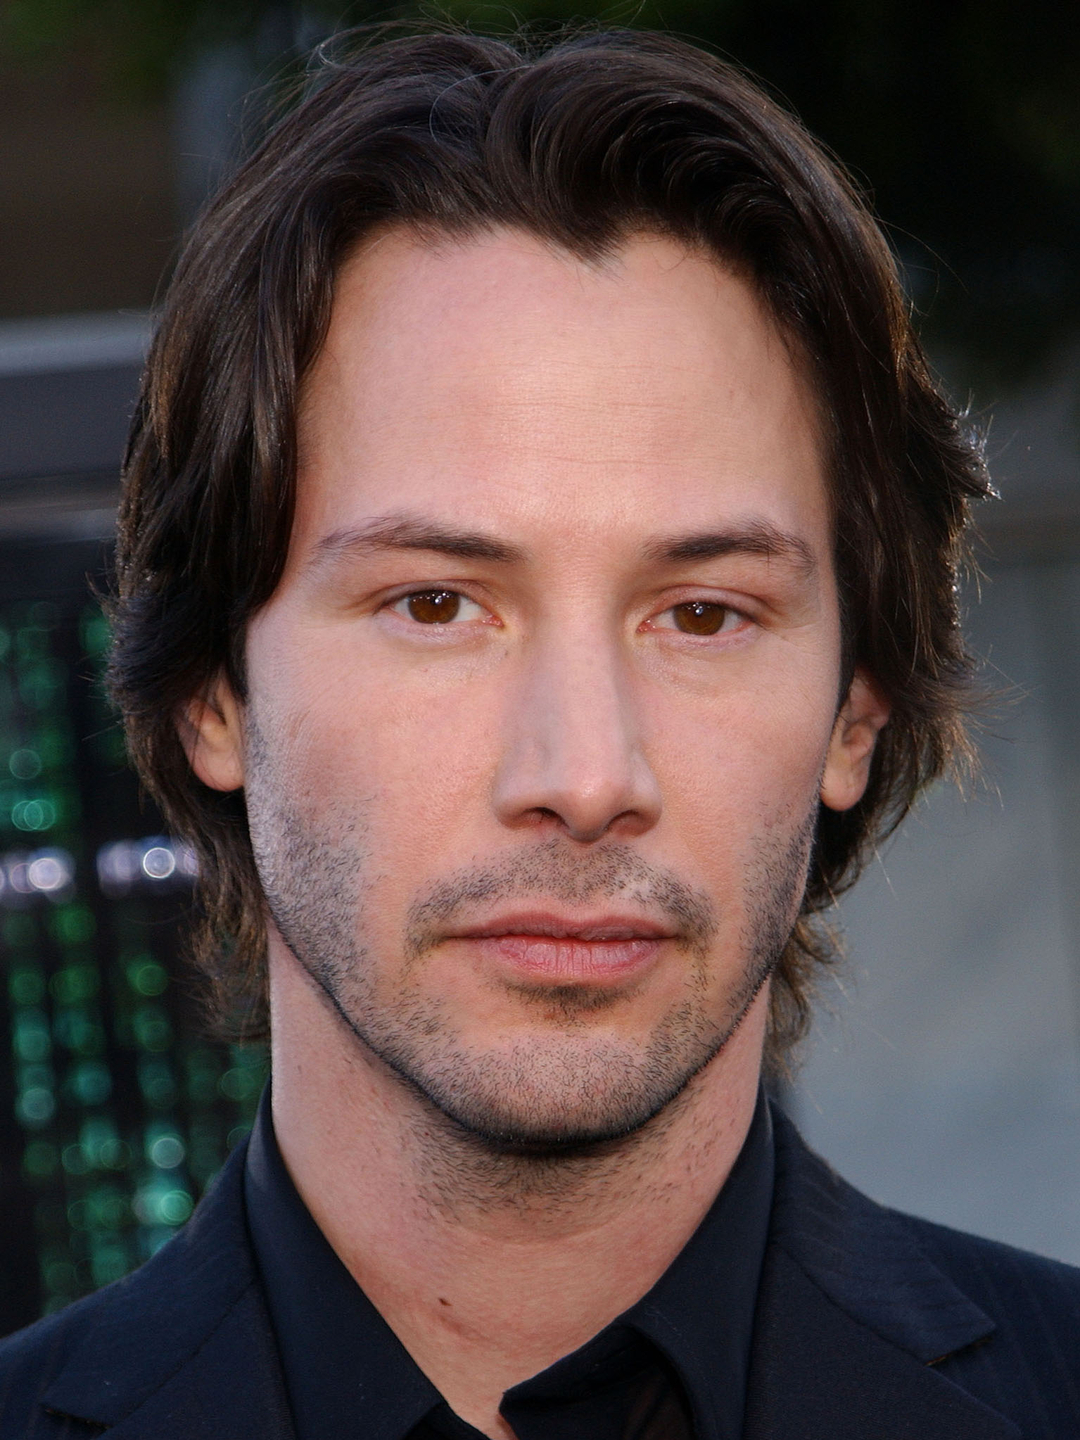 Keanu Reeves height and weight